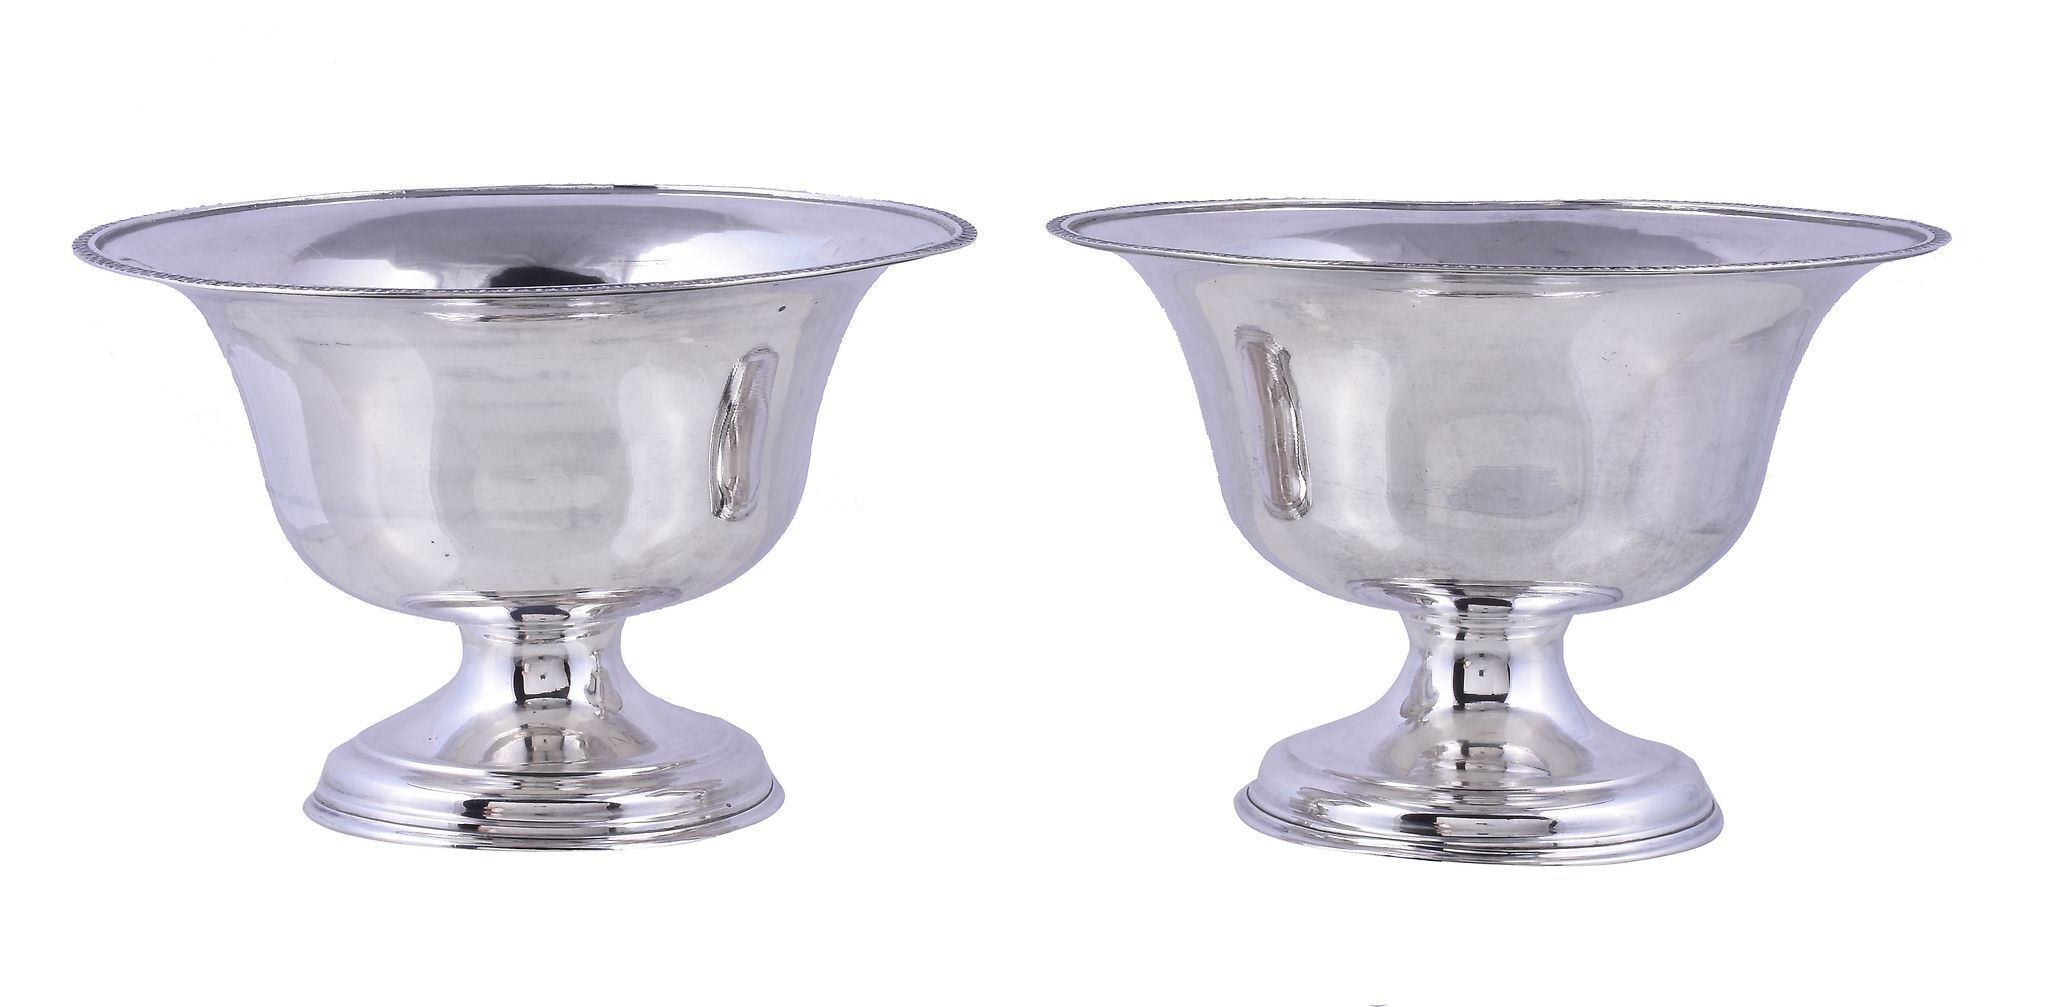 A pair of Norwegian silver coloured circular pedestal bowls by T. Olsen, .830 standard, with